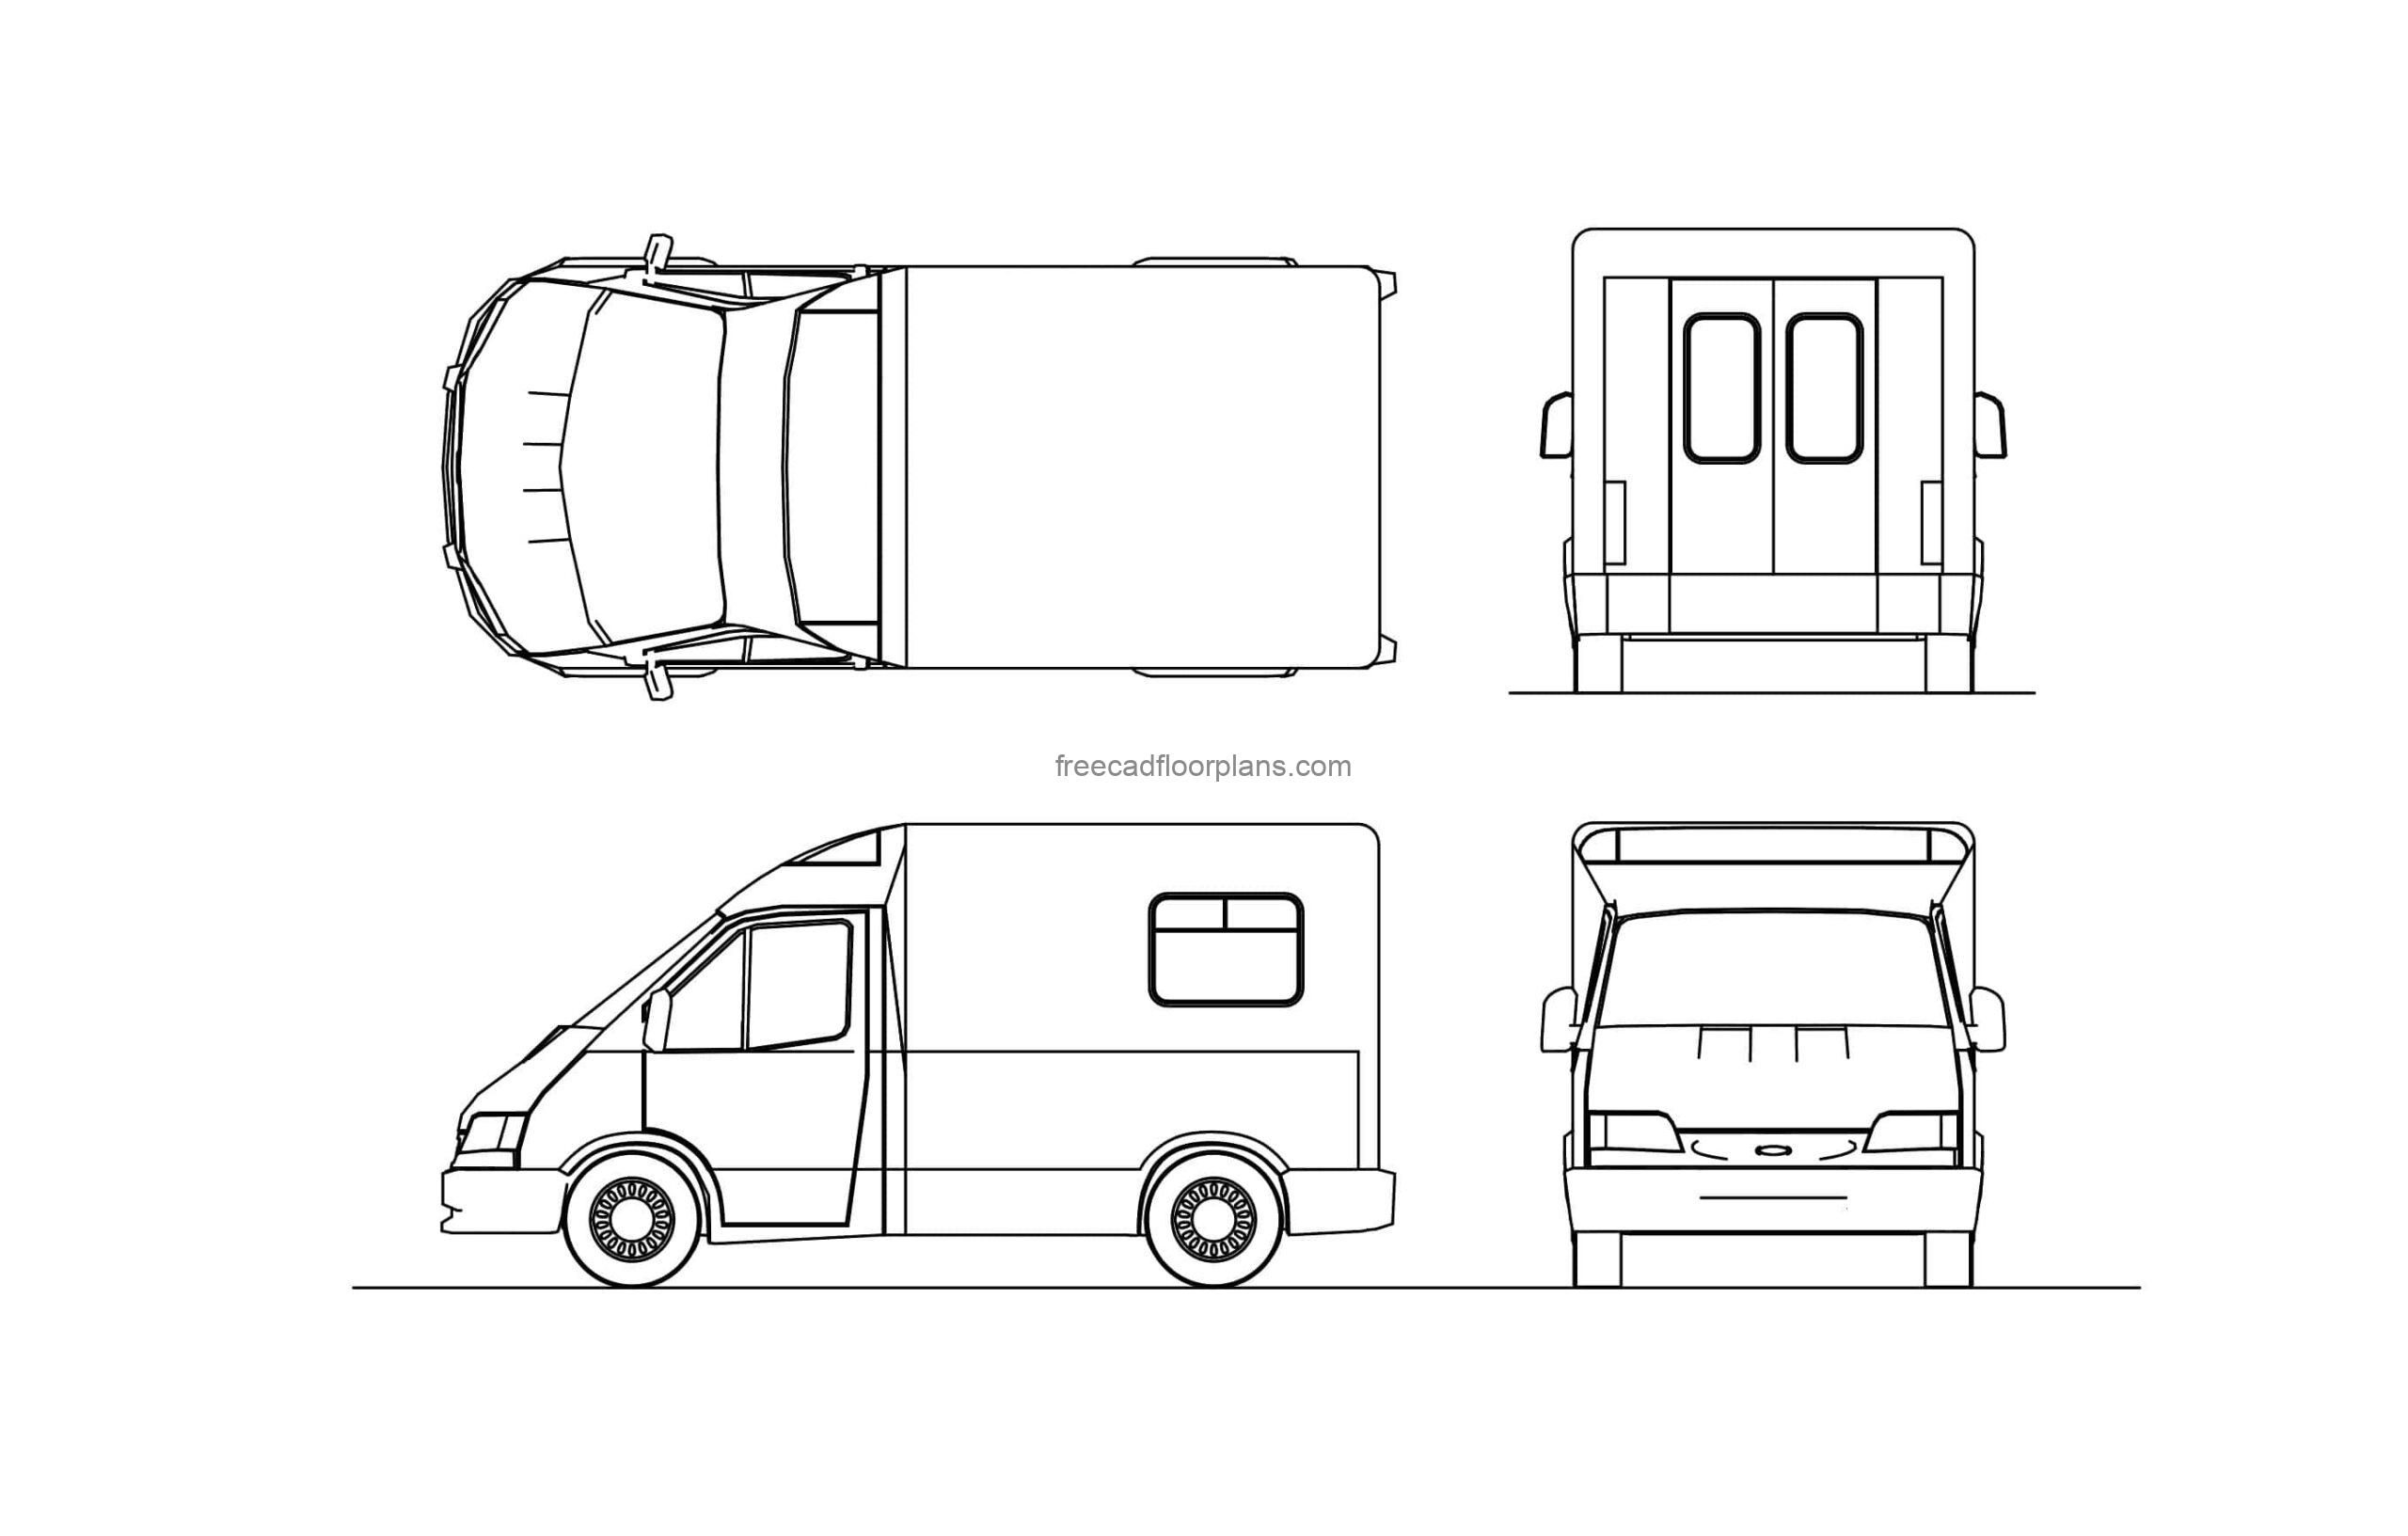 cad block drawing model of a UK ambulance ford transit vehicle, 2d views, plan and elevations, dwg file for free download